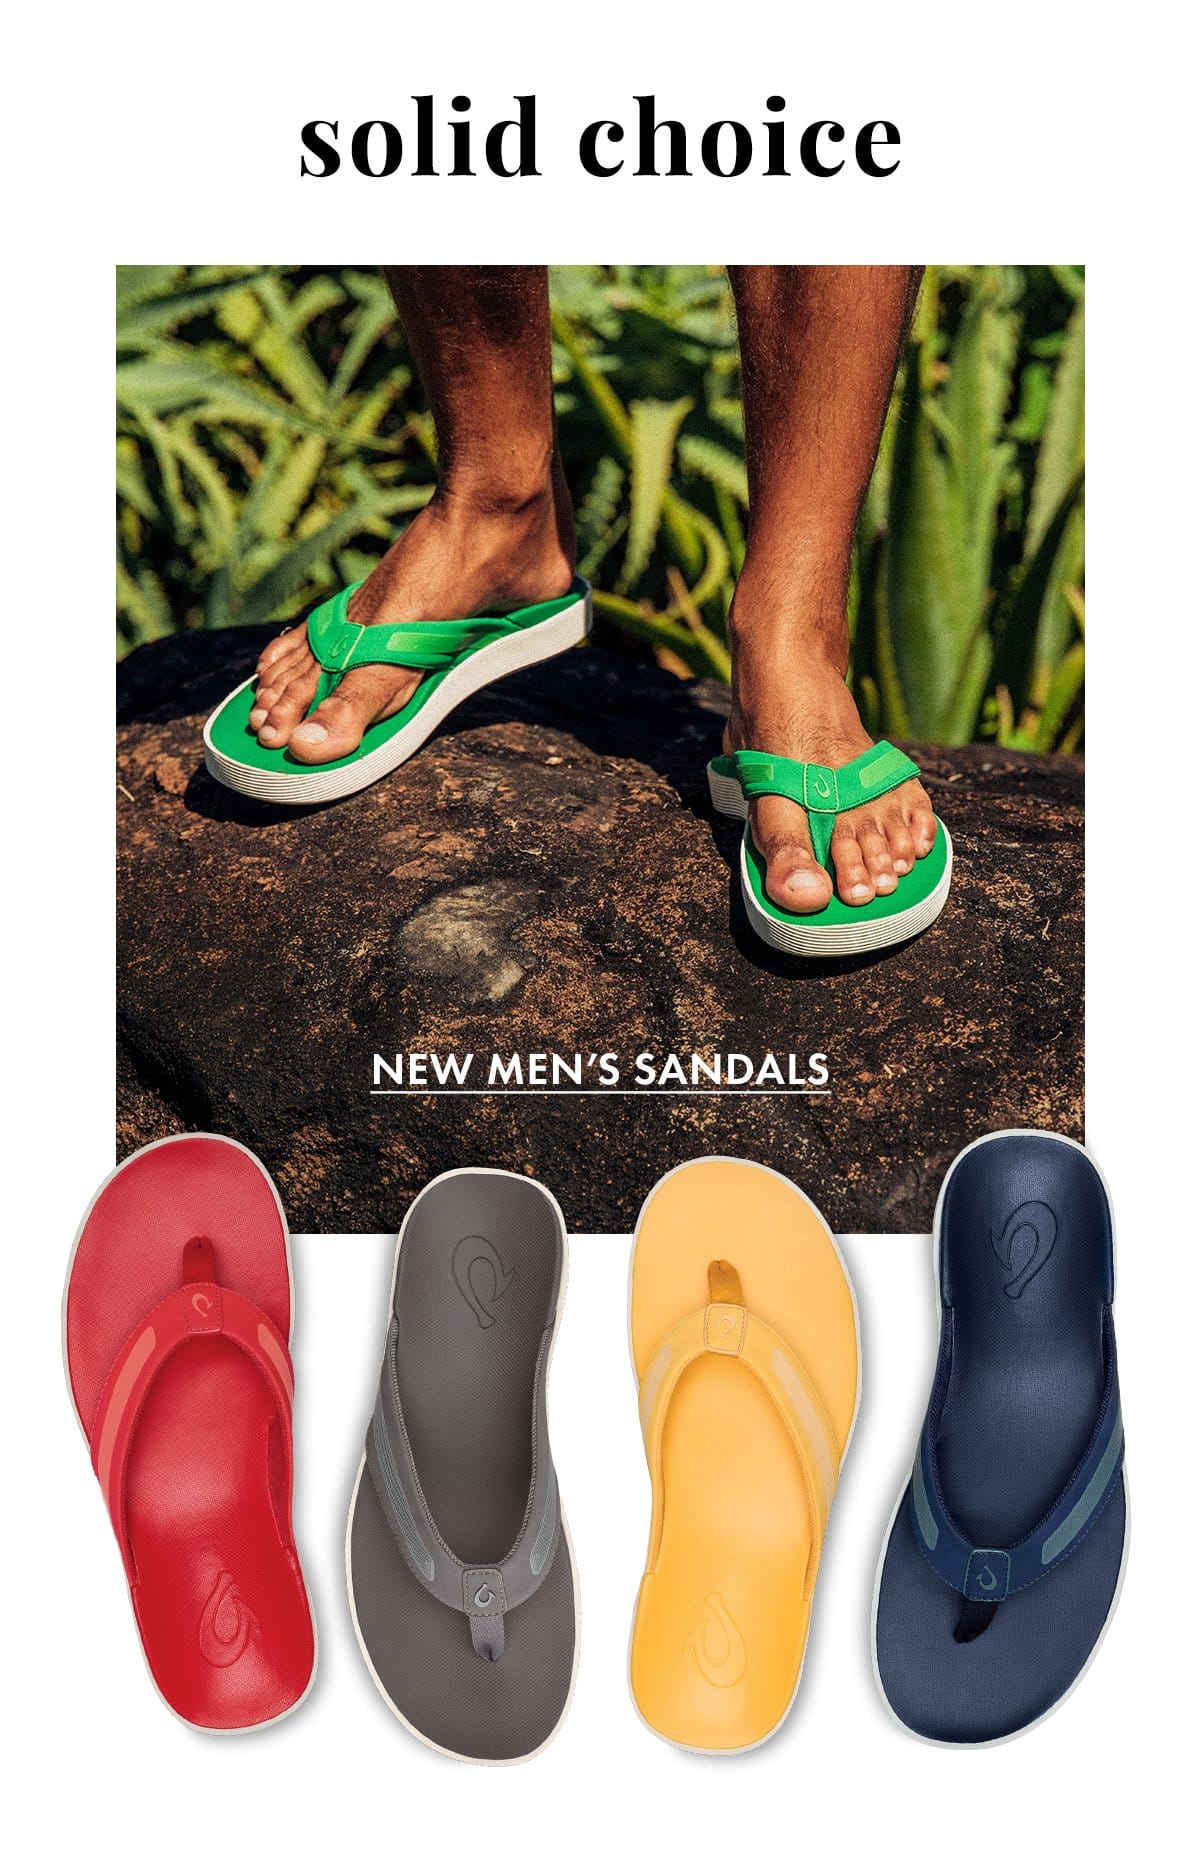 Solid Choice, New Men's Sandals